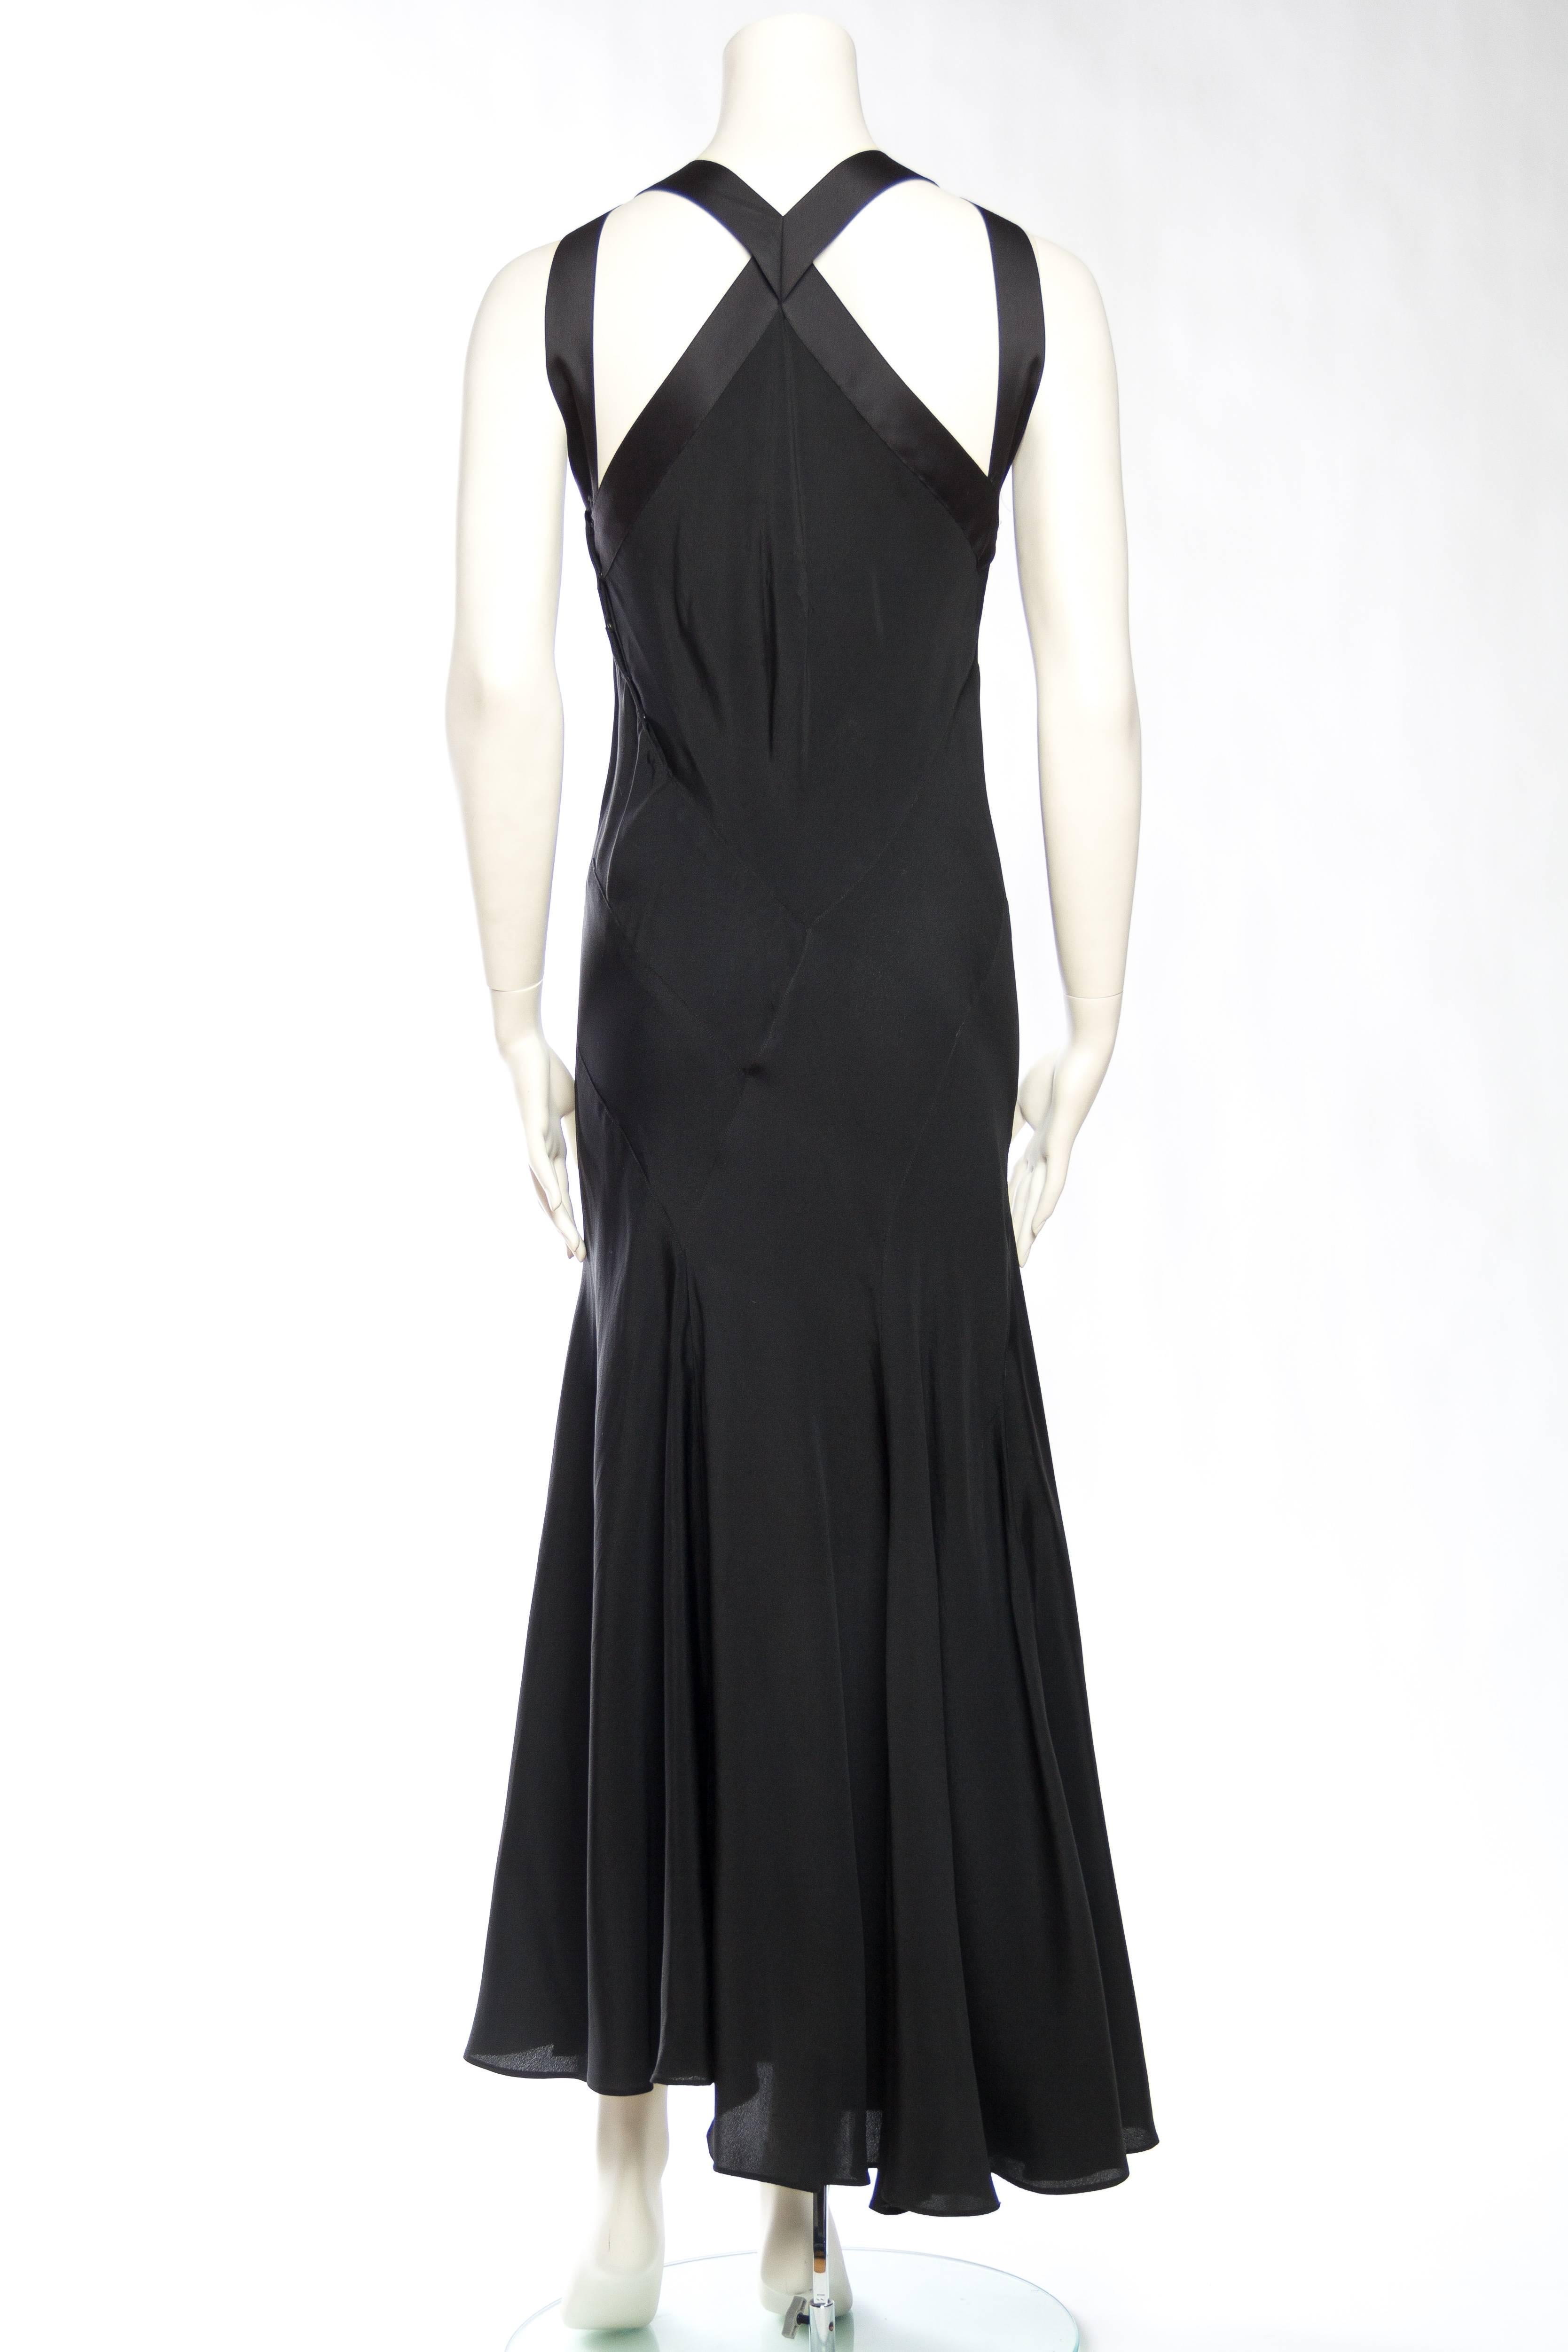 1930s Art-Deco Seamed Bias-Cut Gown with Ribbon Detailed Cut-outs 1